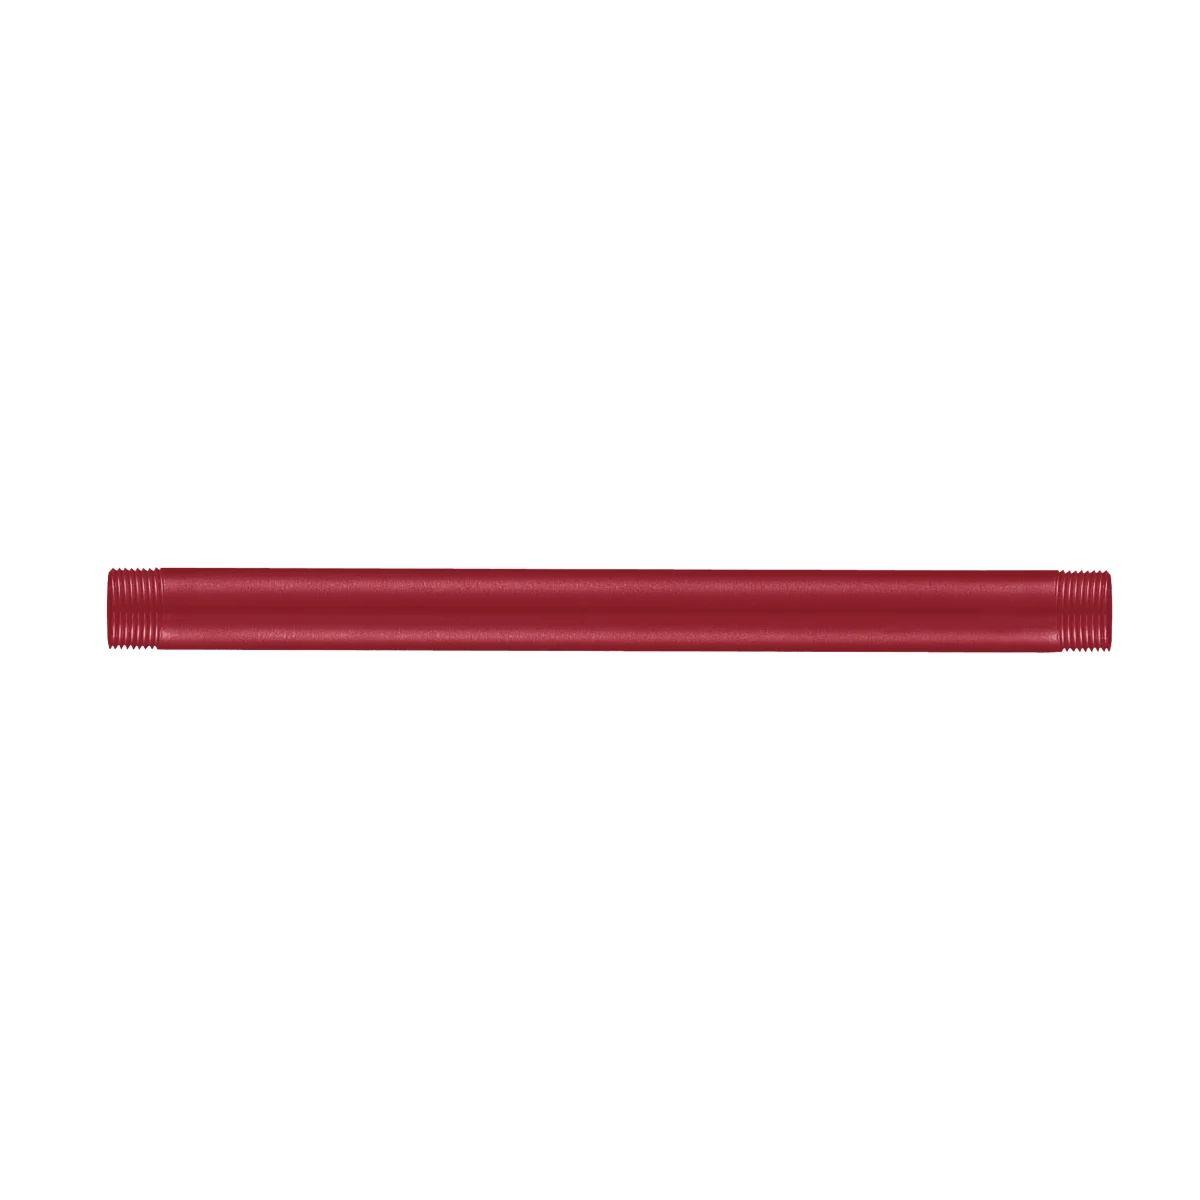 R series 12 In. Long Architectural Straight Stem